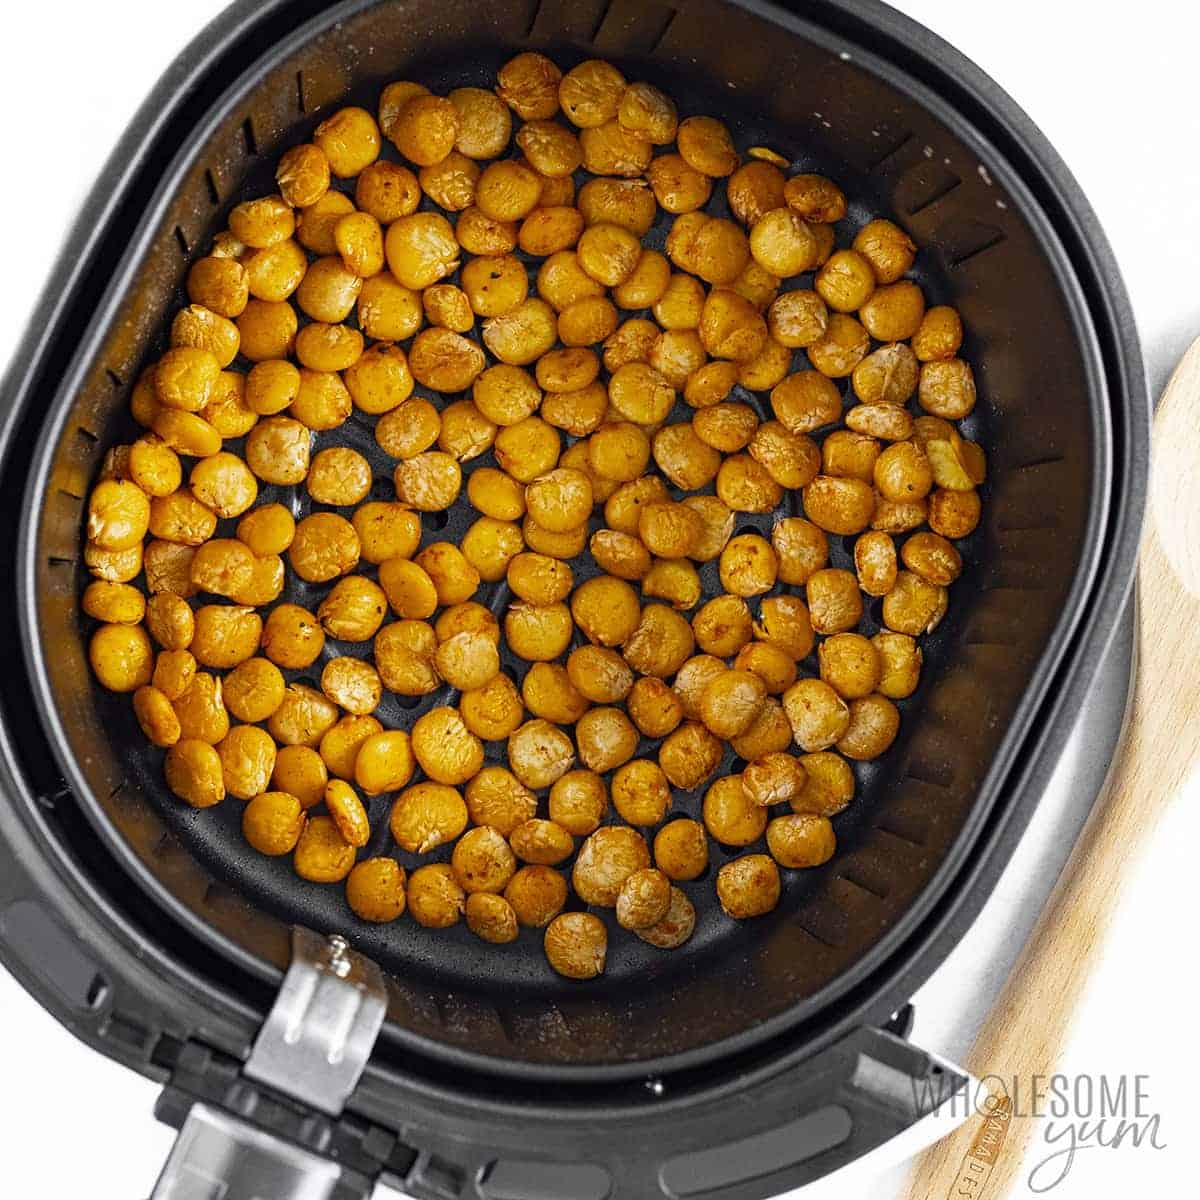 Finished lupini beans in air fryer basket